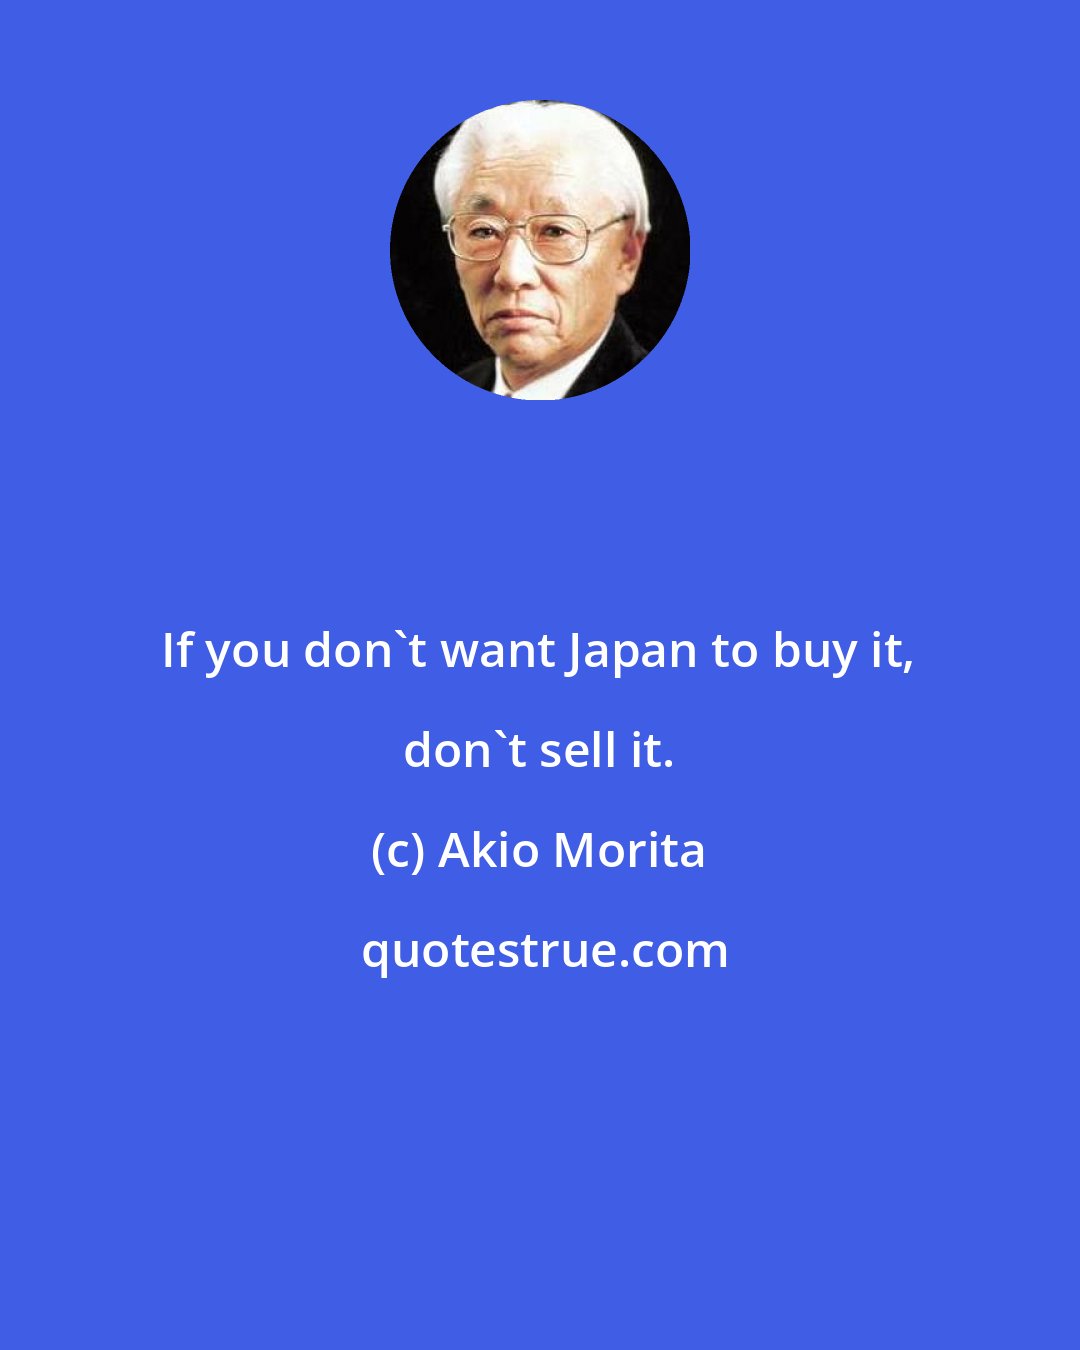 Akio Morita: If you don't want Japan to buy it, don't sell it.